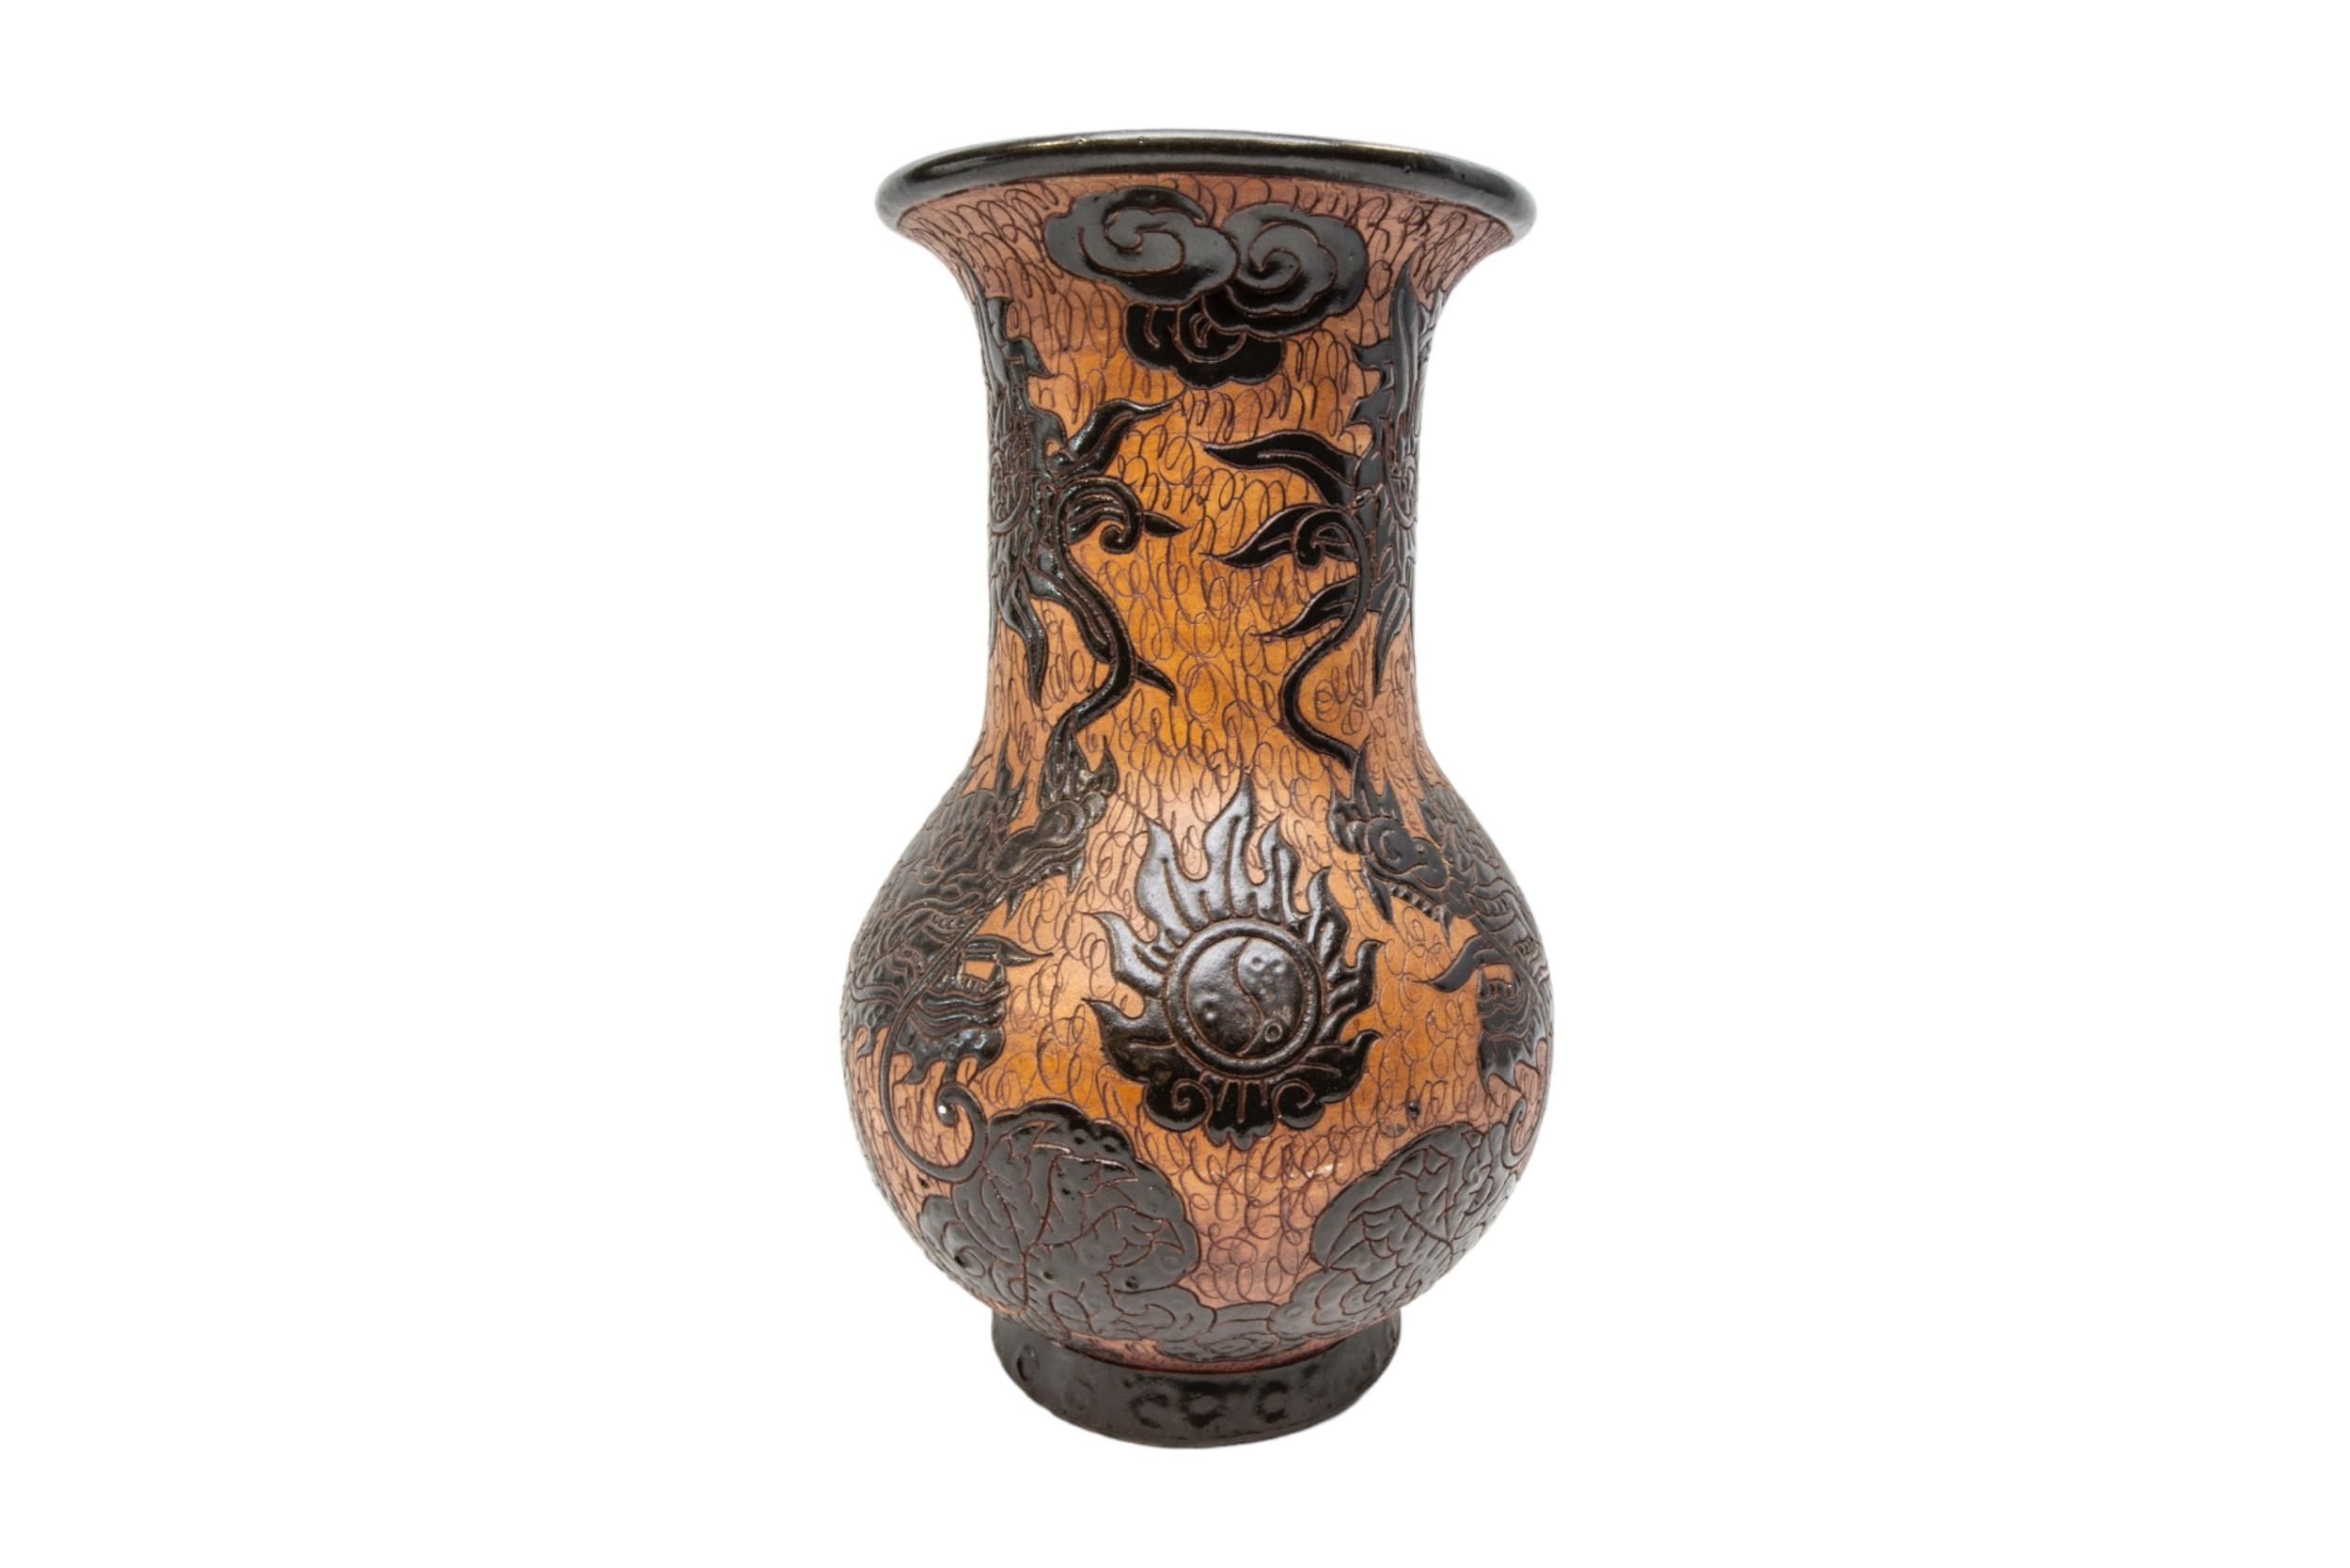 A VINTAGE DONA SAIGON EARTHENWARE VASE, CIRCA 1960, the sides decorated with coiled scaly dragons on - Image 2 of 2